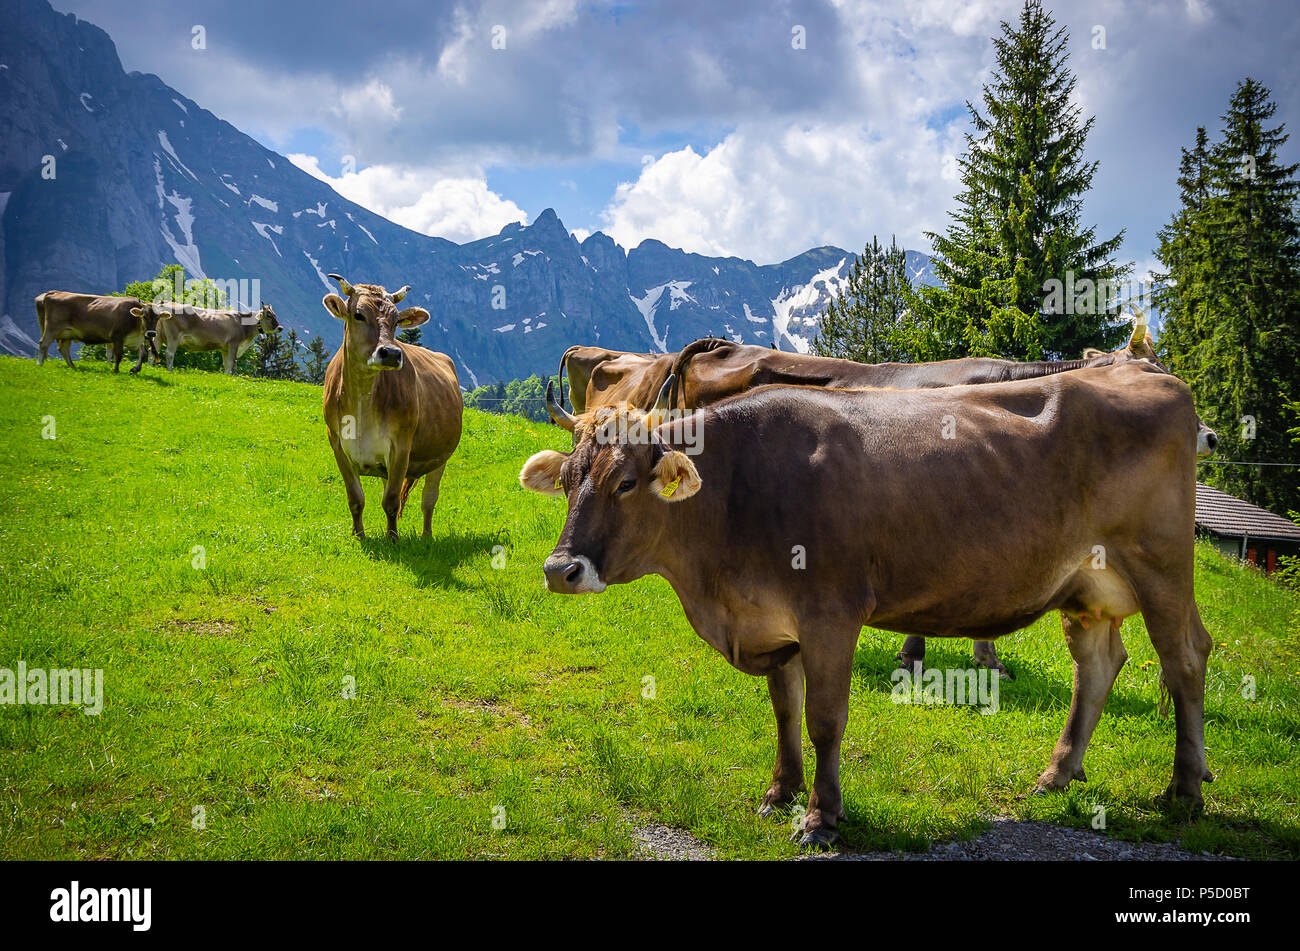 Cows with properly attached ear tags on a mountain meadow in the Swiss Alps near Urnäsch and Schwägalp, Canton Appenzell Ausserrhoden, Switzerland. Stock Photo